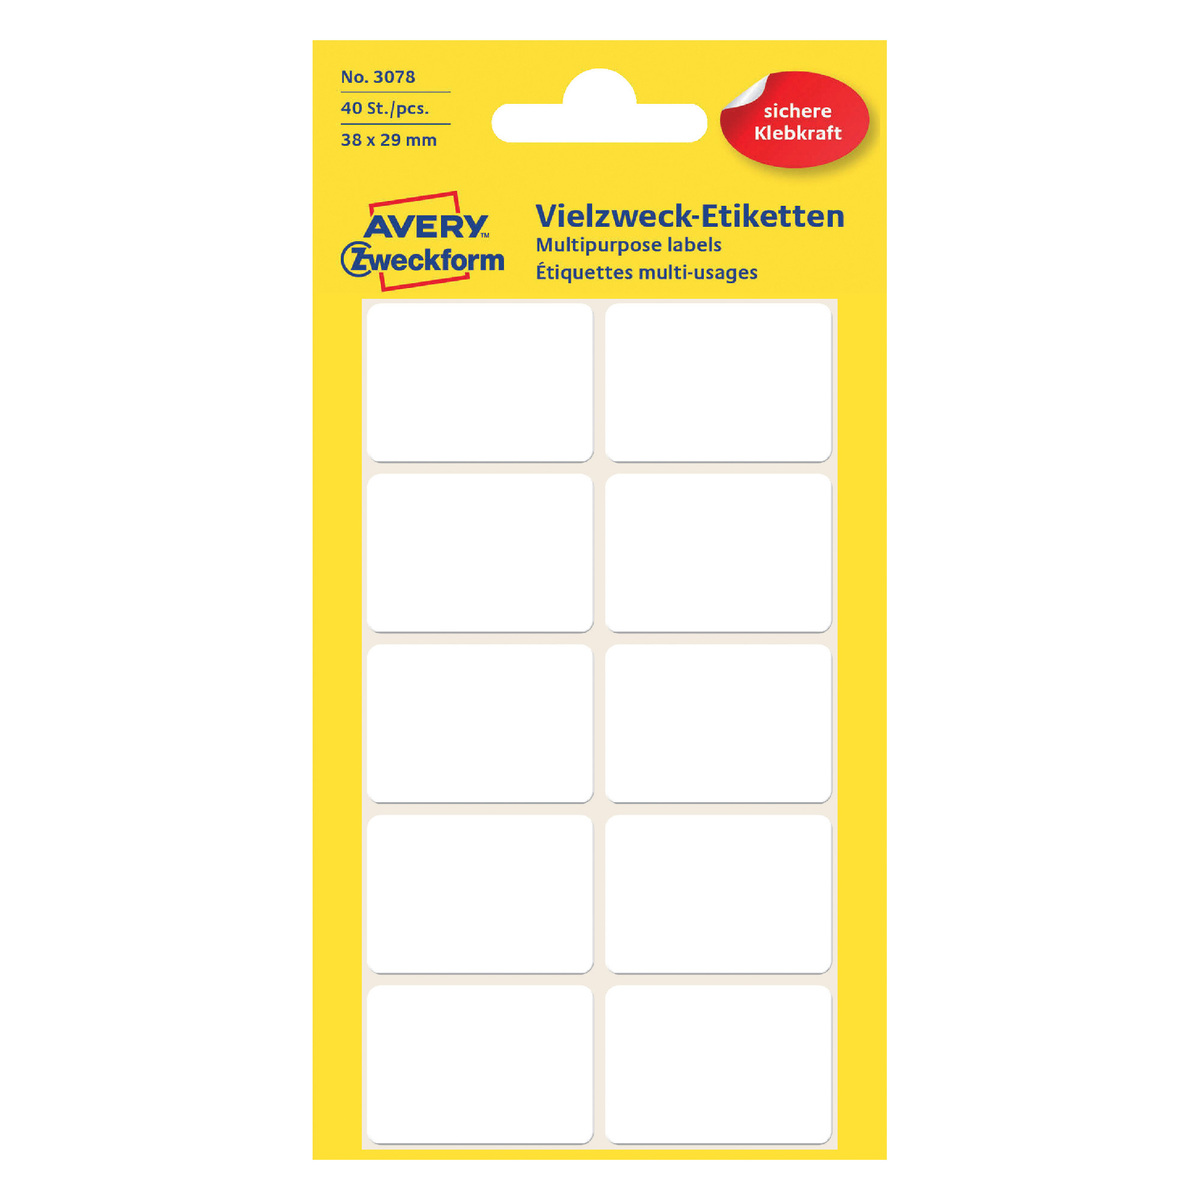 Avery 38 x 29 mm Permanent Multipurpose Labels, 40 Labels/5 Page, White, 3078